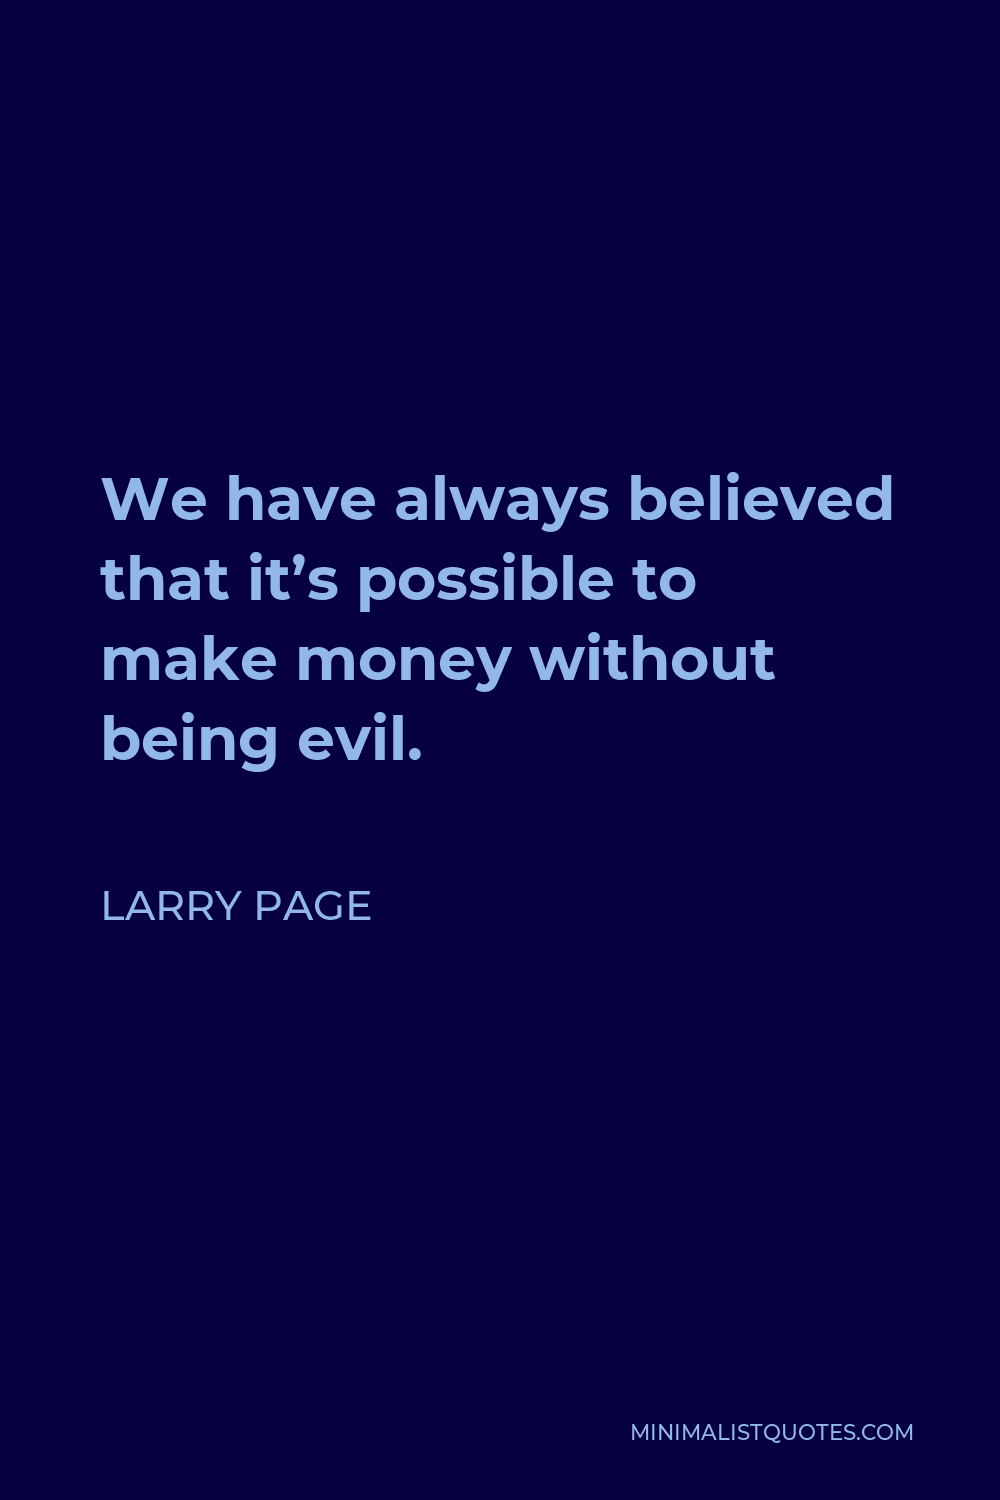 Larry Page Quote - We have always believed that it’s possible to make money without being evil.